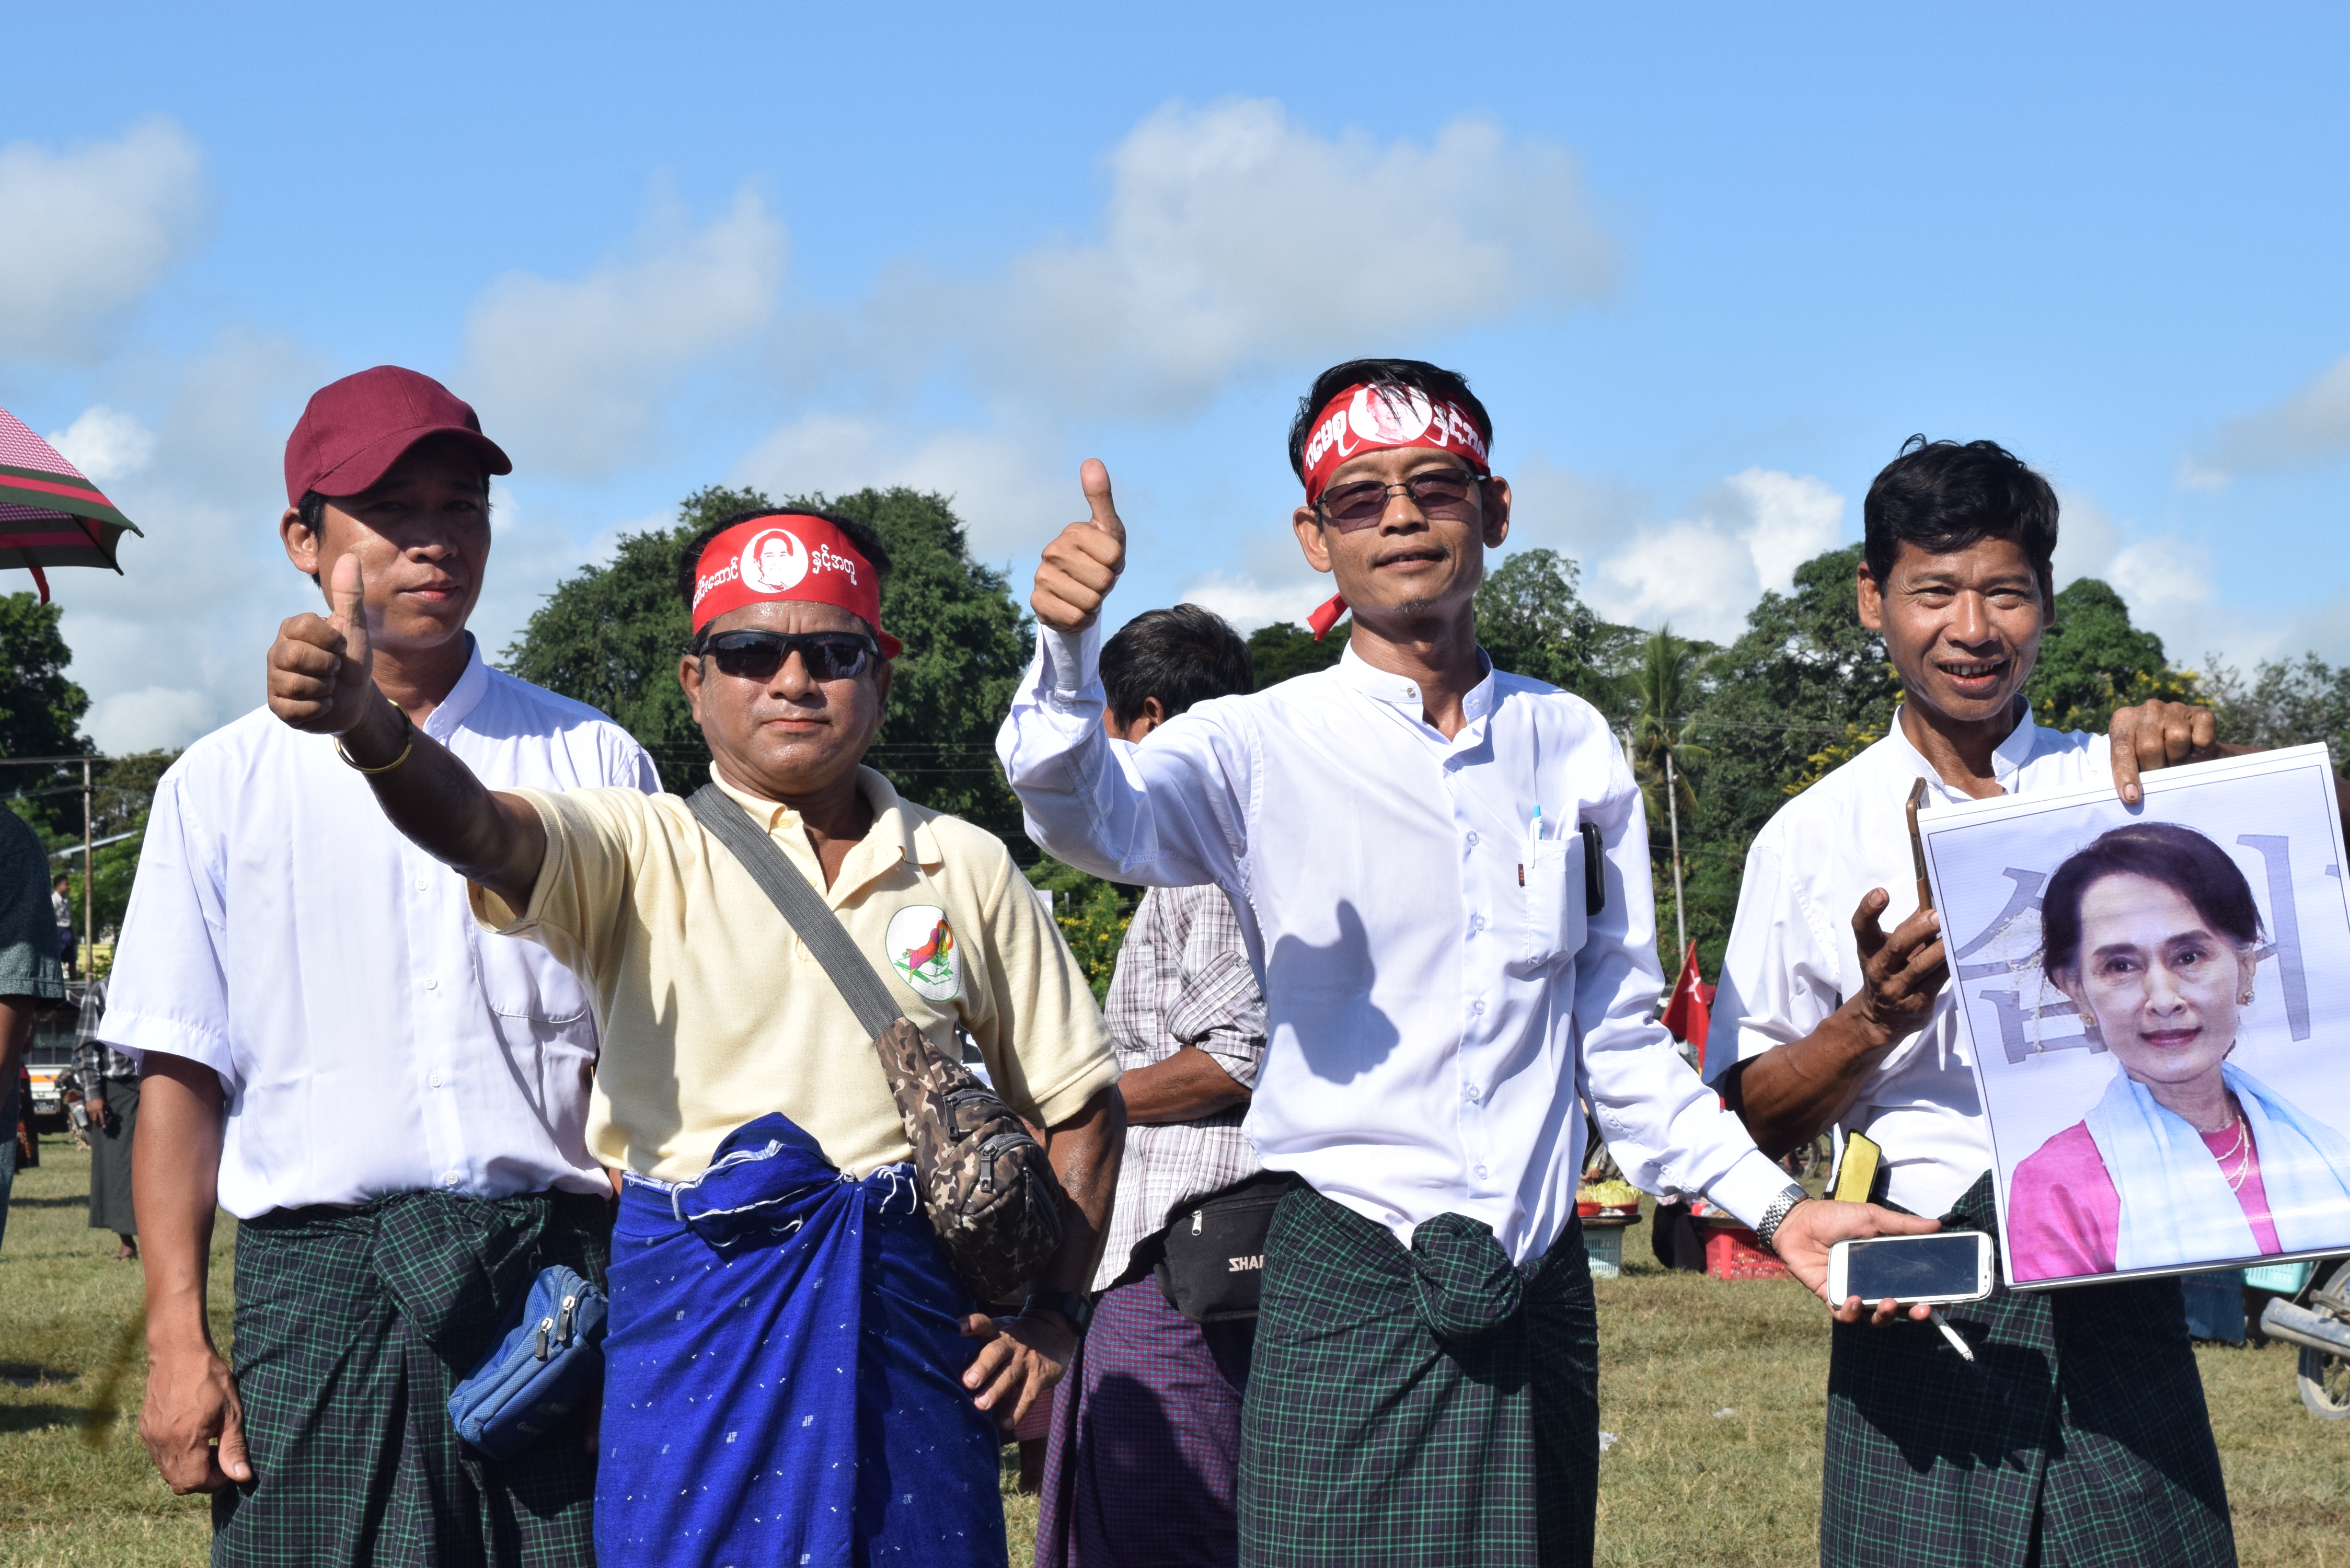 Taungoo locals rally for ‘absolutely flawless’ Suu Kyi